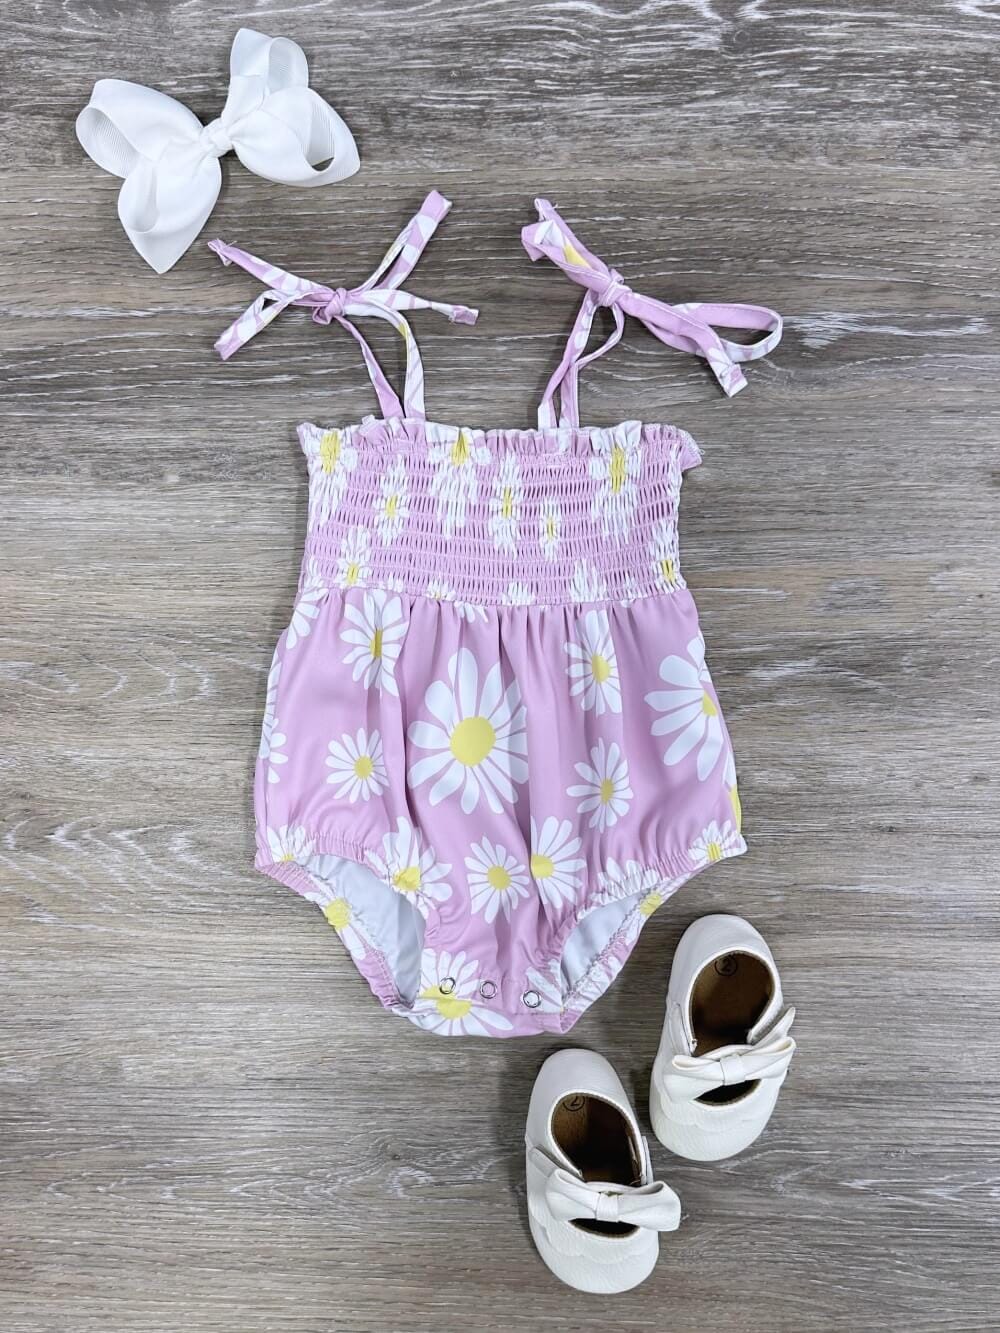 Among the Daisies Lavender Tie Sleeve Smocked Girls Baby Bubble Romper - Sydney So Sweet